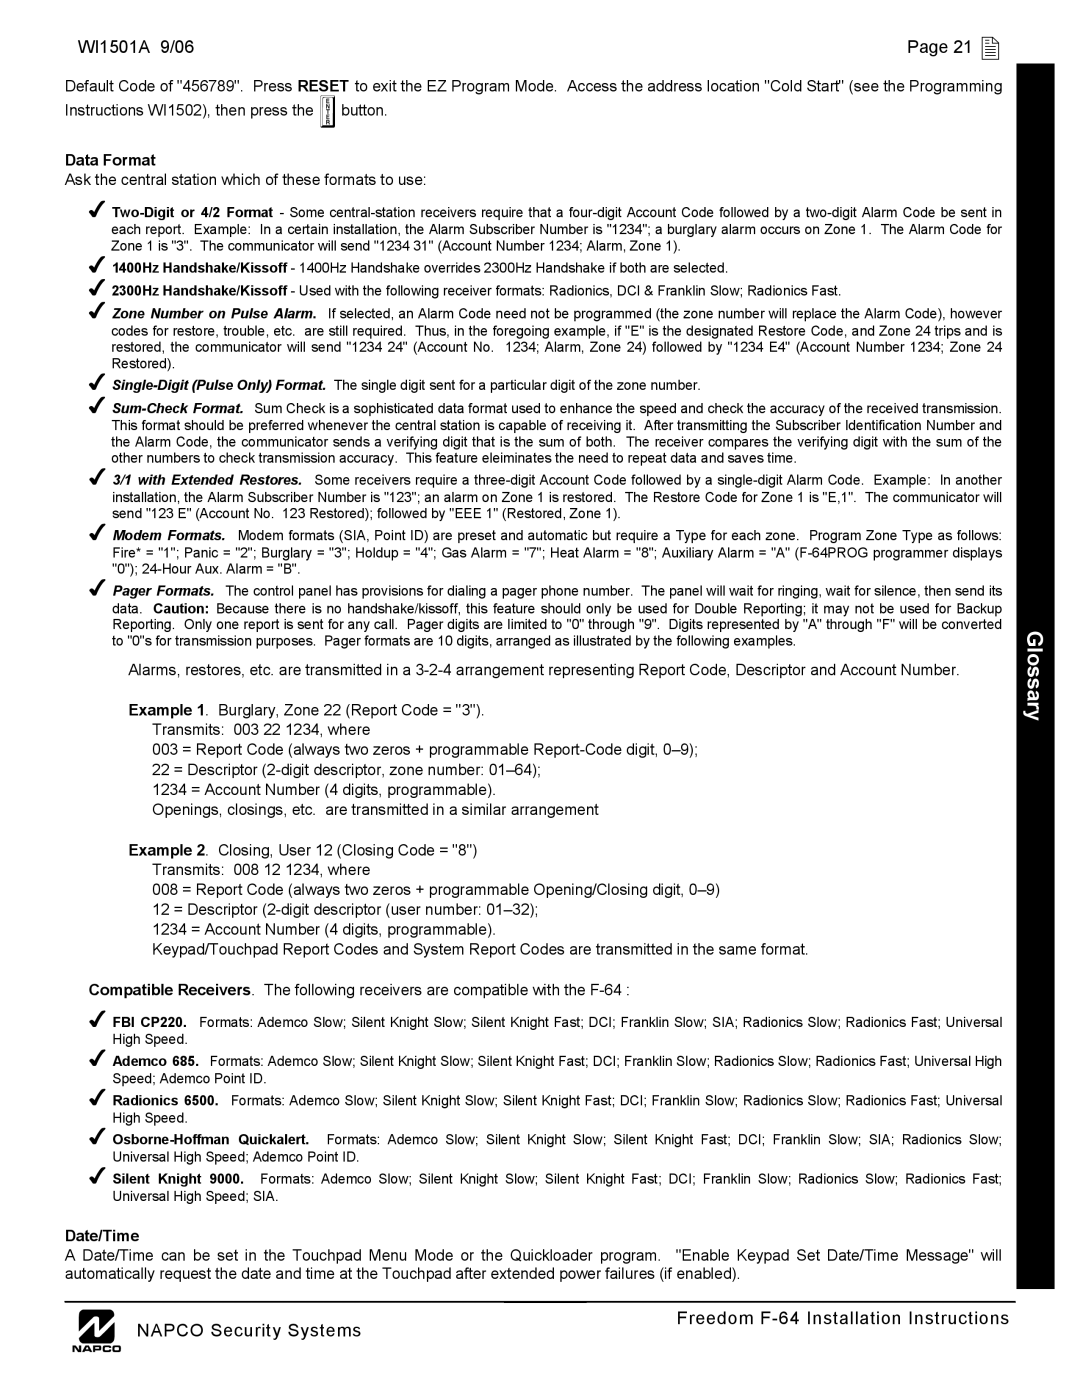 Napco Security Technologies Glossary, WI1501A 9/06, Page 21 , L NAPCO Security Systems, Data Format, Date/Time 